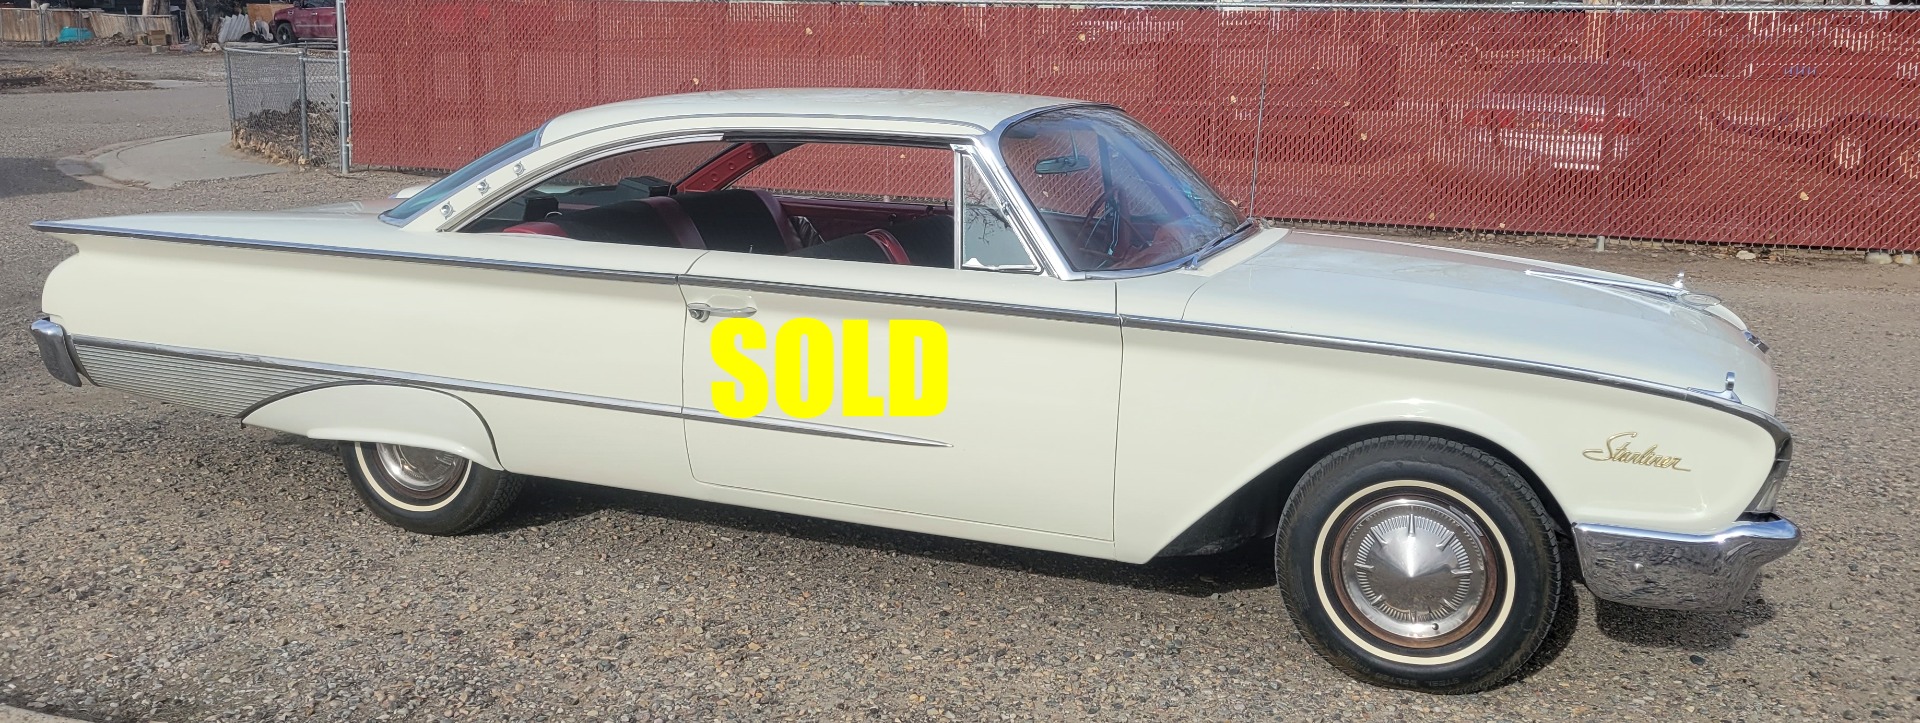 Used 1960 Ford Starliner